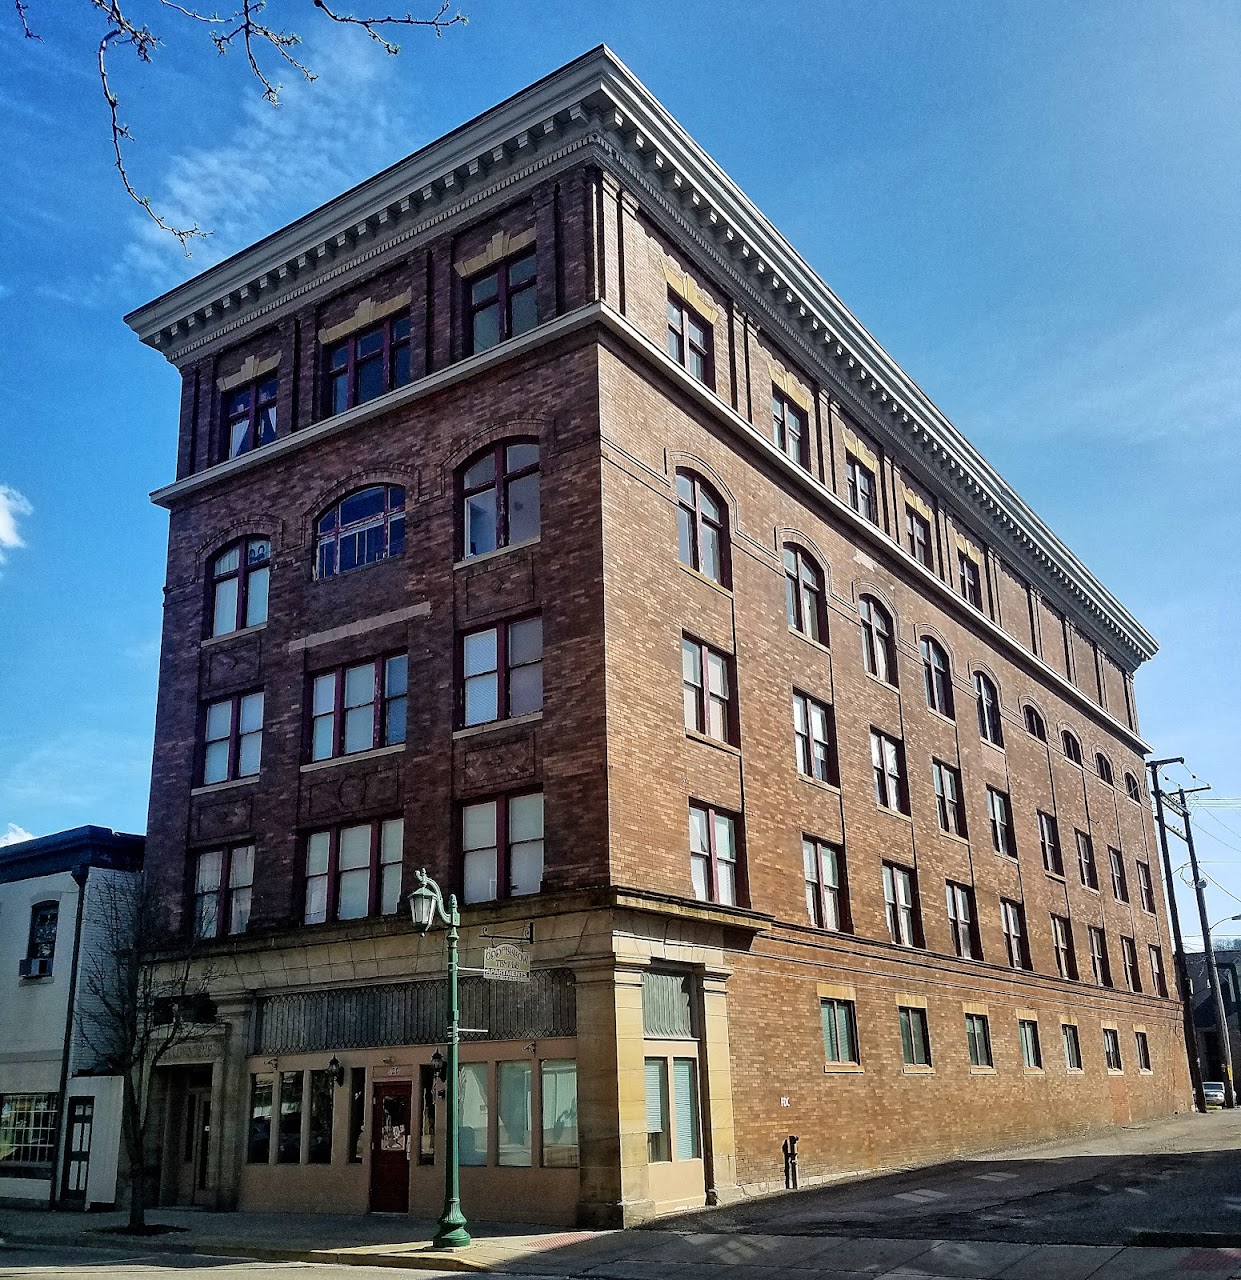 Photo of ODD FELLOWS. Affordable housing located at 120 W SIXTH ST EAST LIVERPOOL, OH 43920